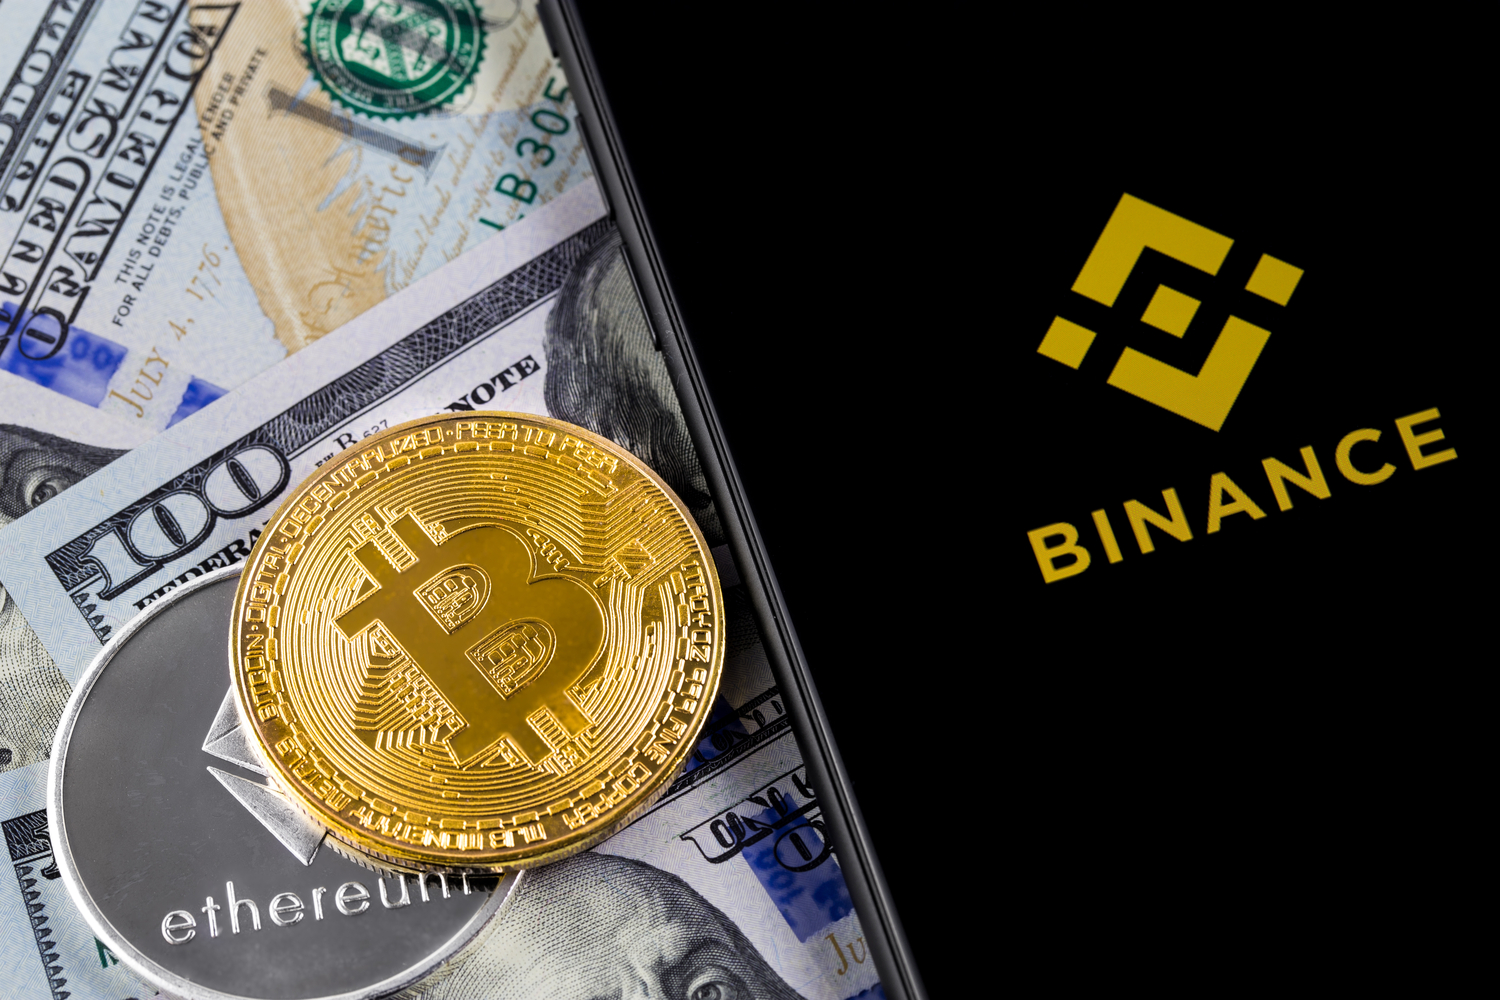 Binance’s BNB Token Hits All-Time High in Bitcoin Value